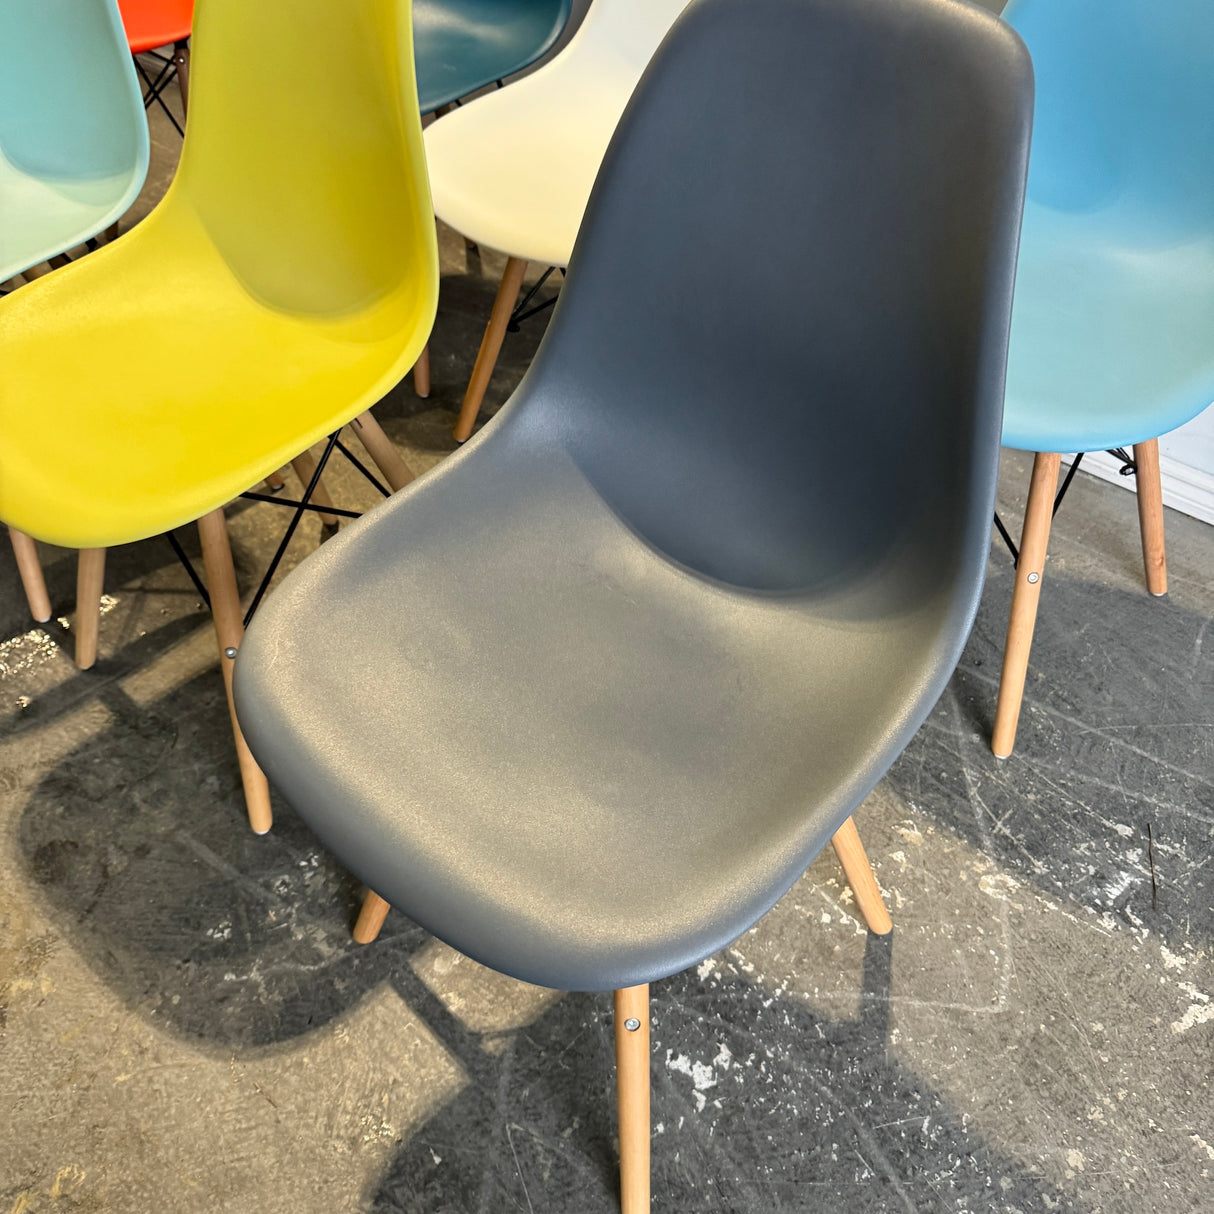 Authentic! Herman Miller Assorted of 8 different color Eames side chairs